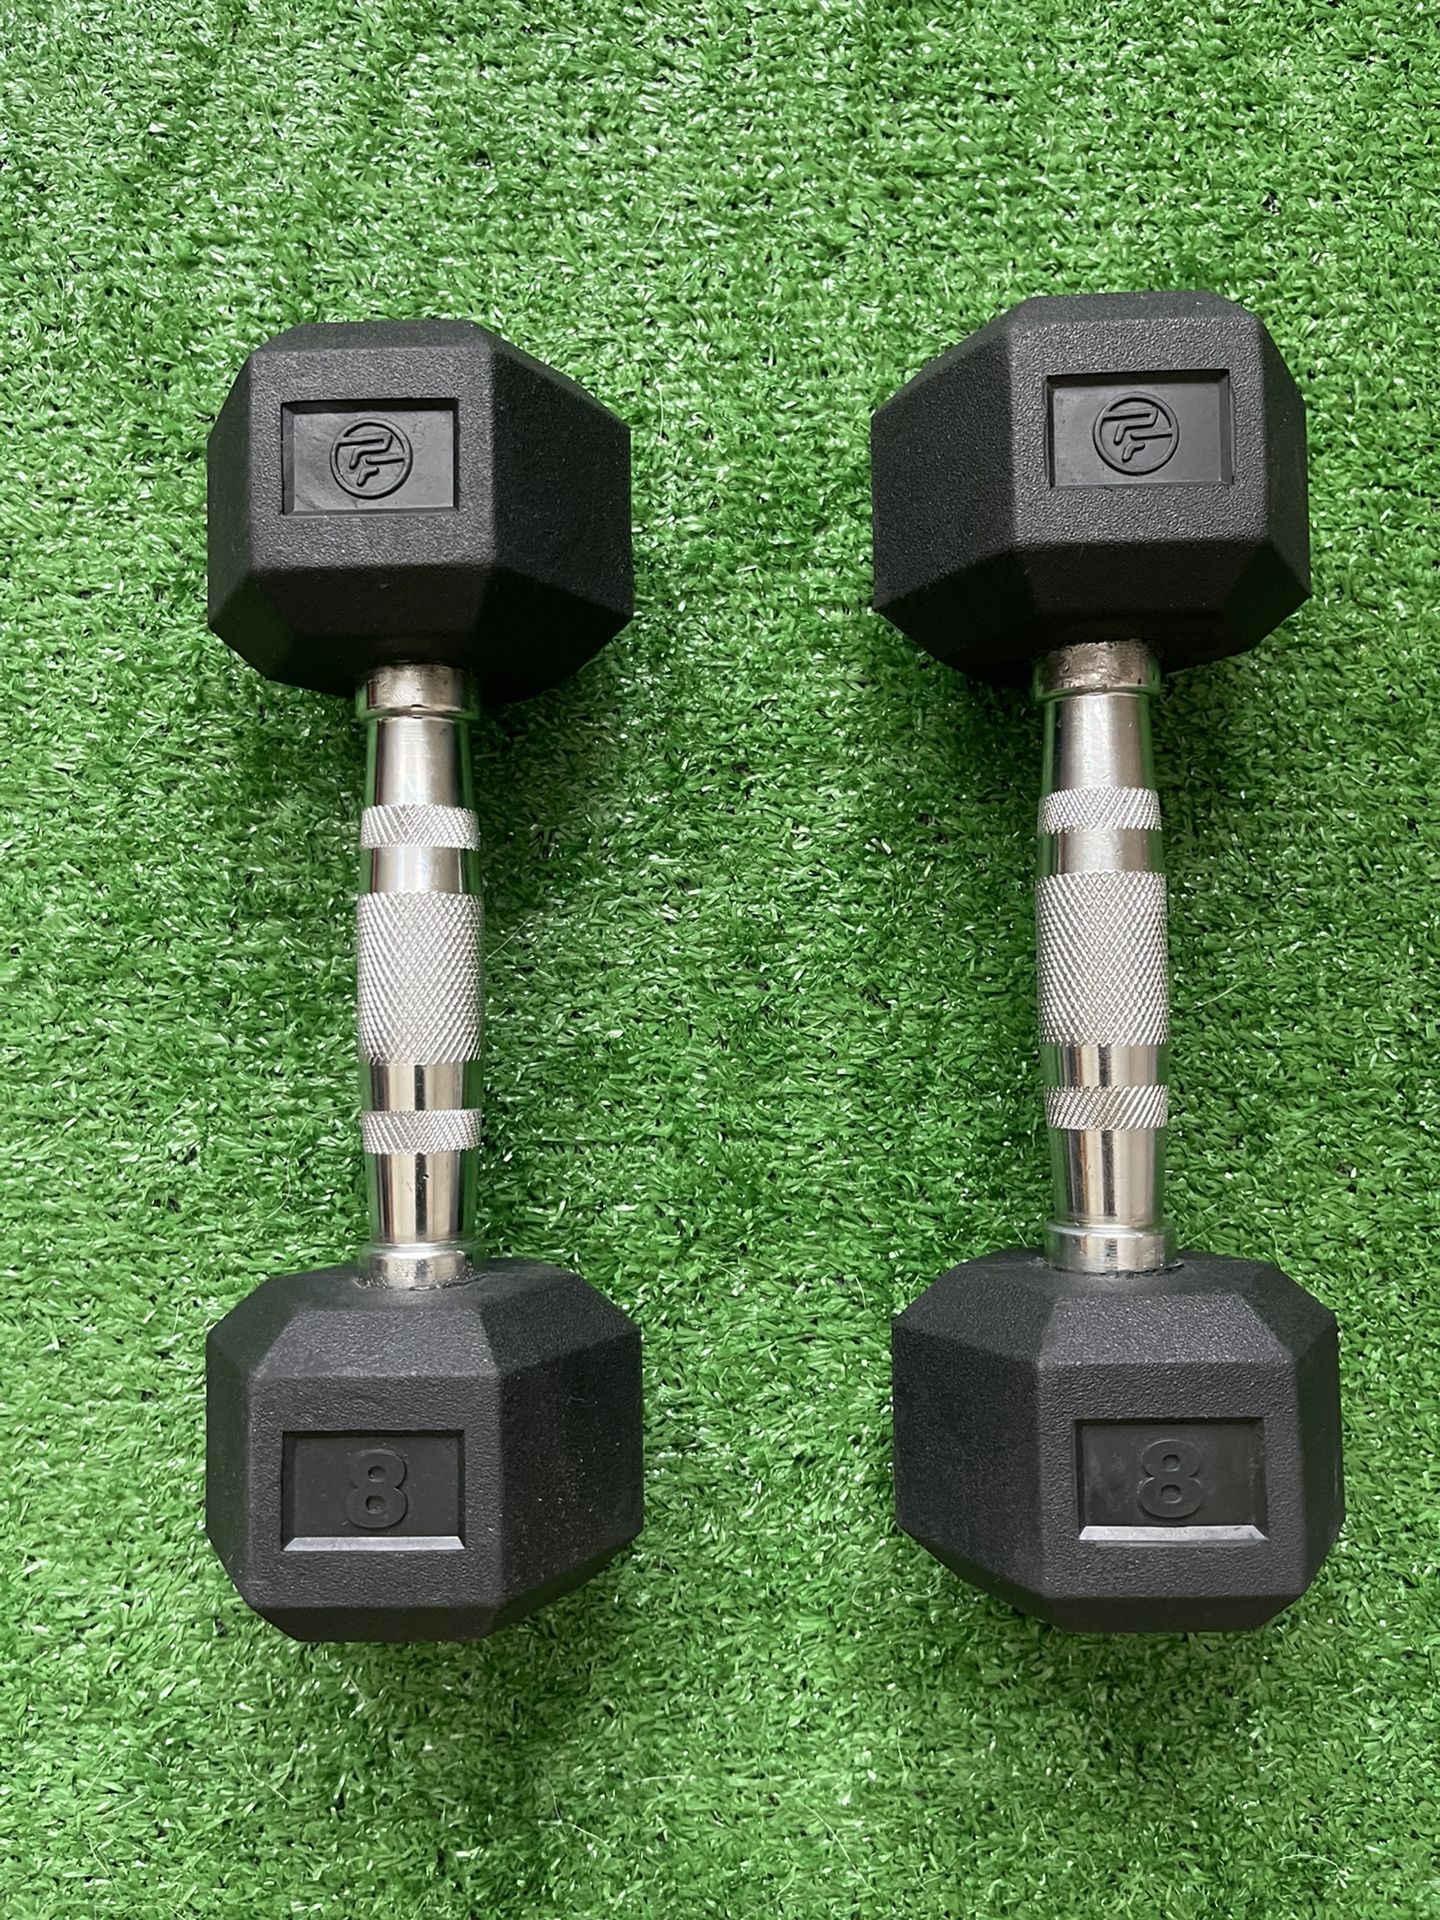 Rubber Hex Dumbbells Brand New Weights Gym Equipment